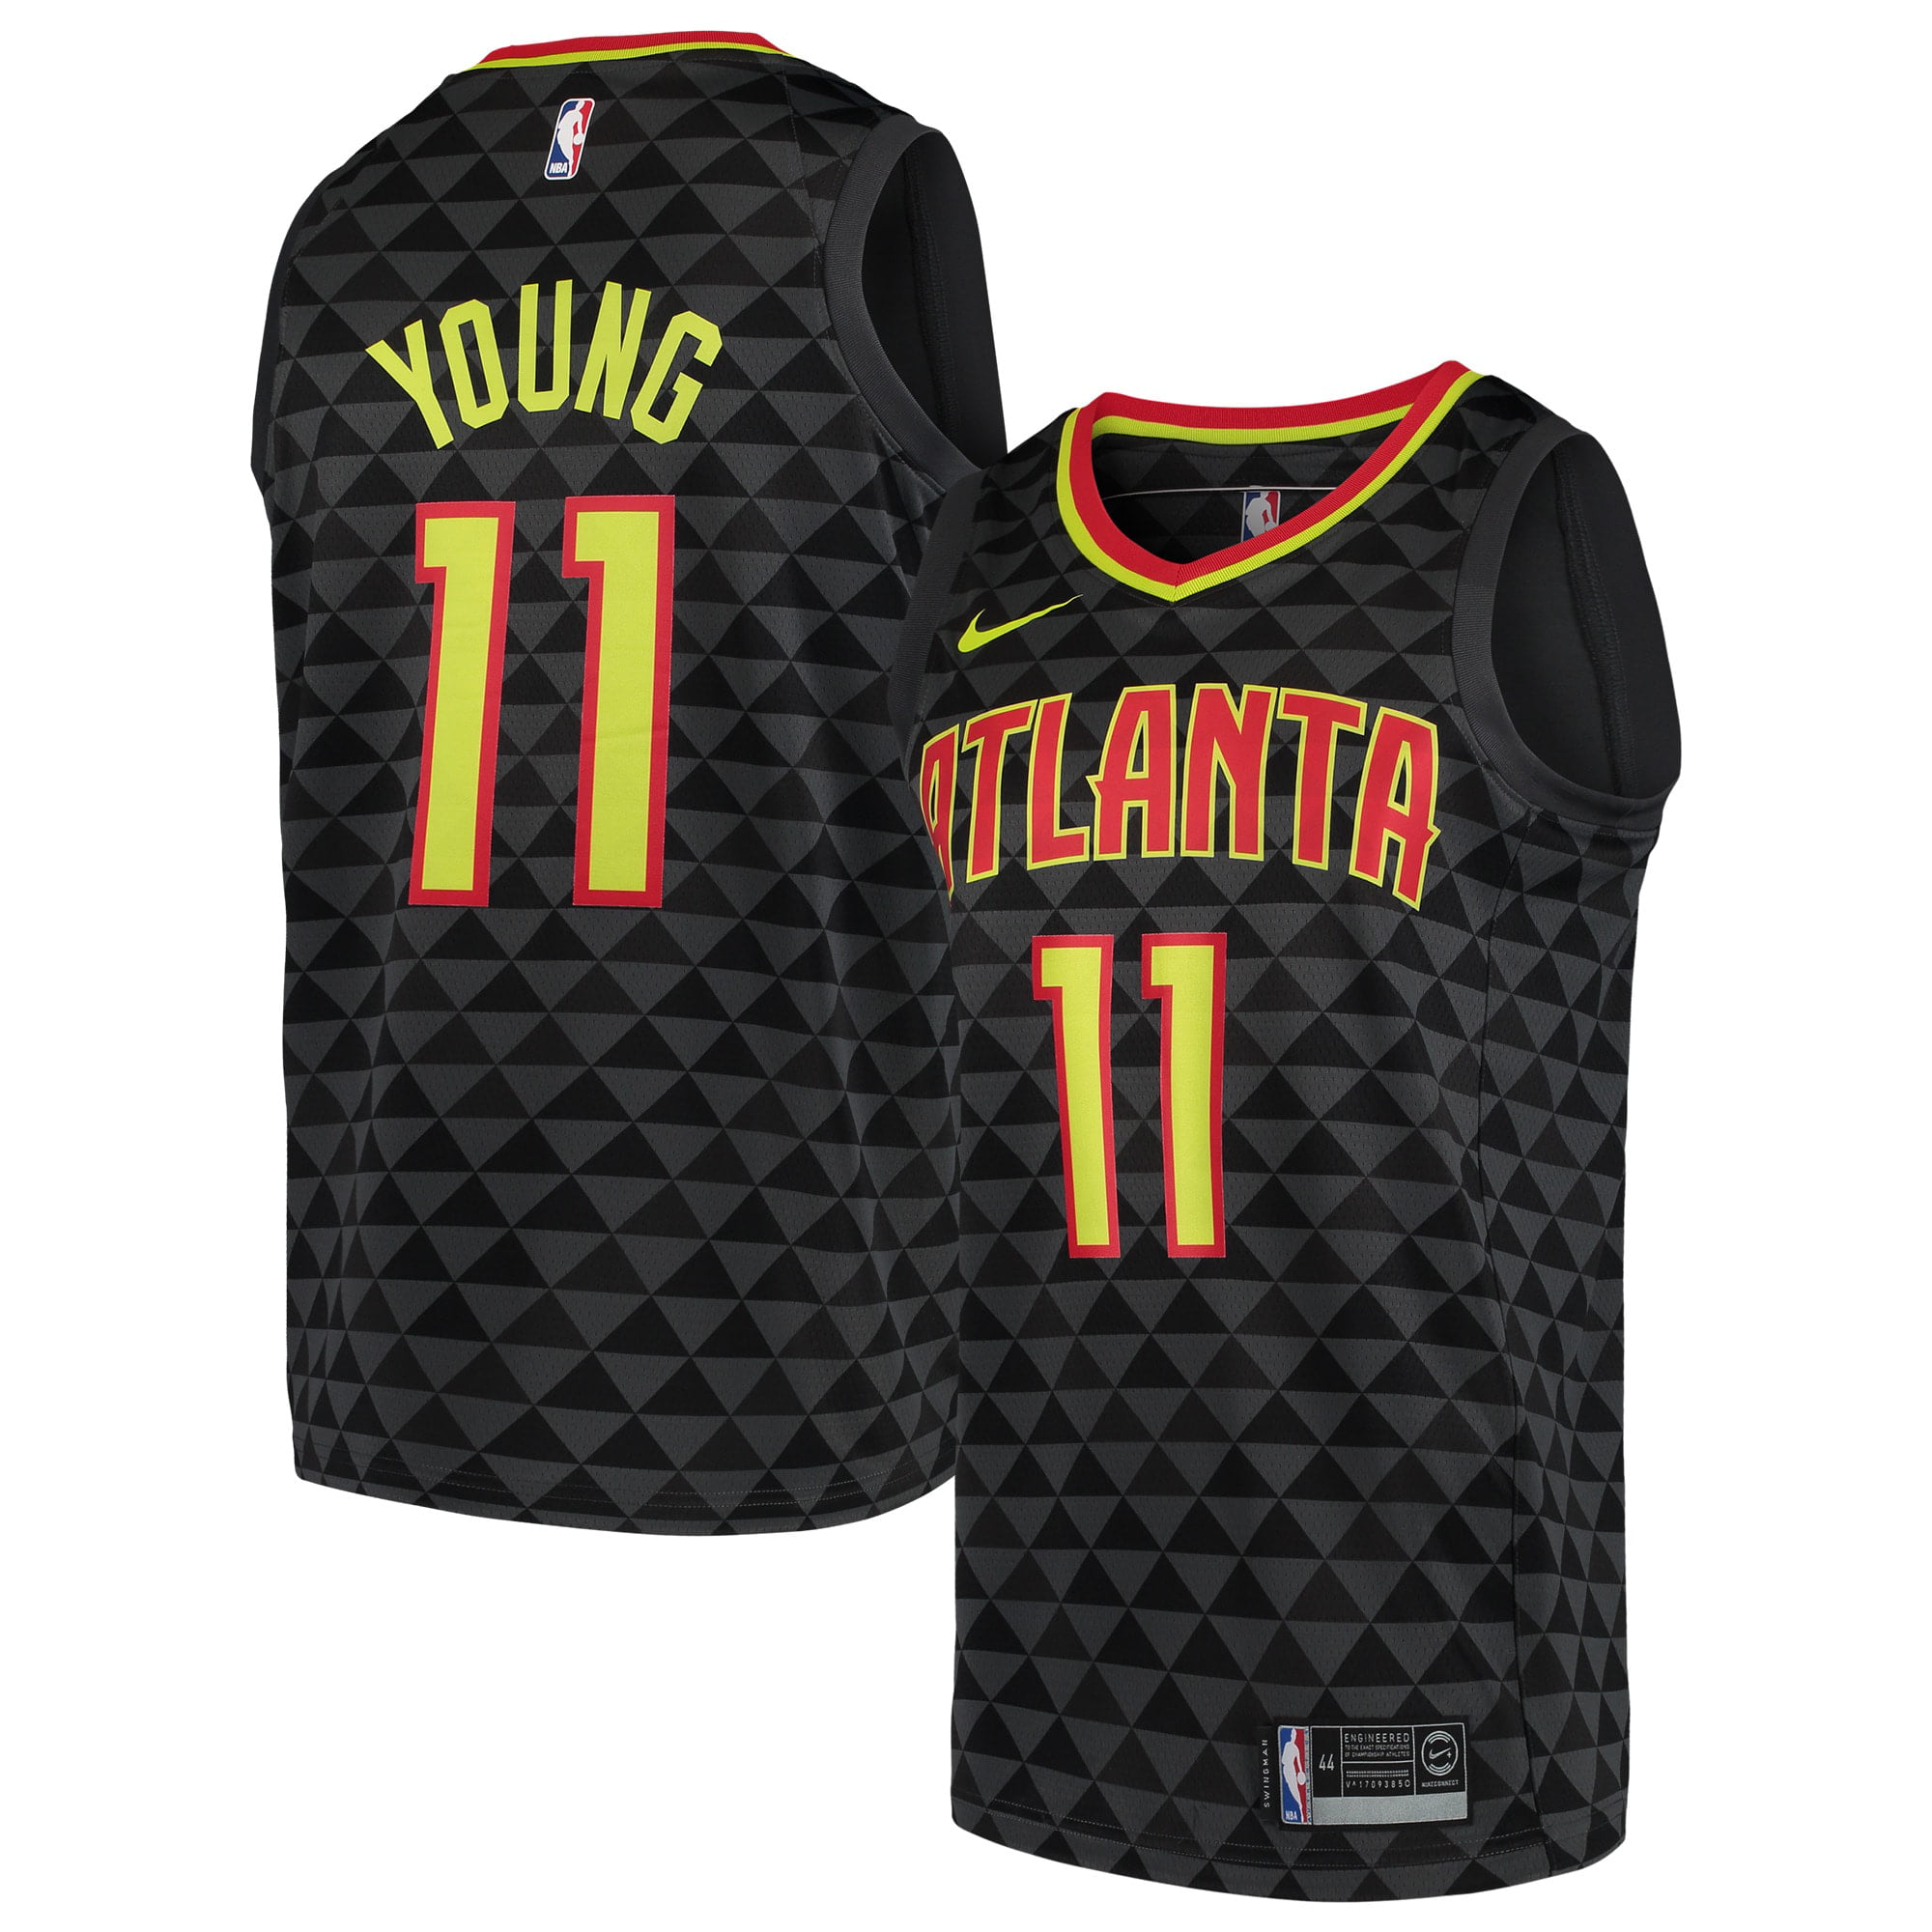 Trae Young #11 Atlanta Hawks Fans Jersey Breathable Embroidered Basketball Training Uniform Mens Basketball Jersey